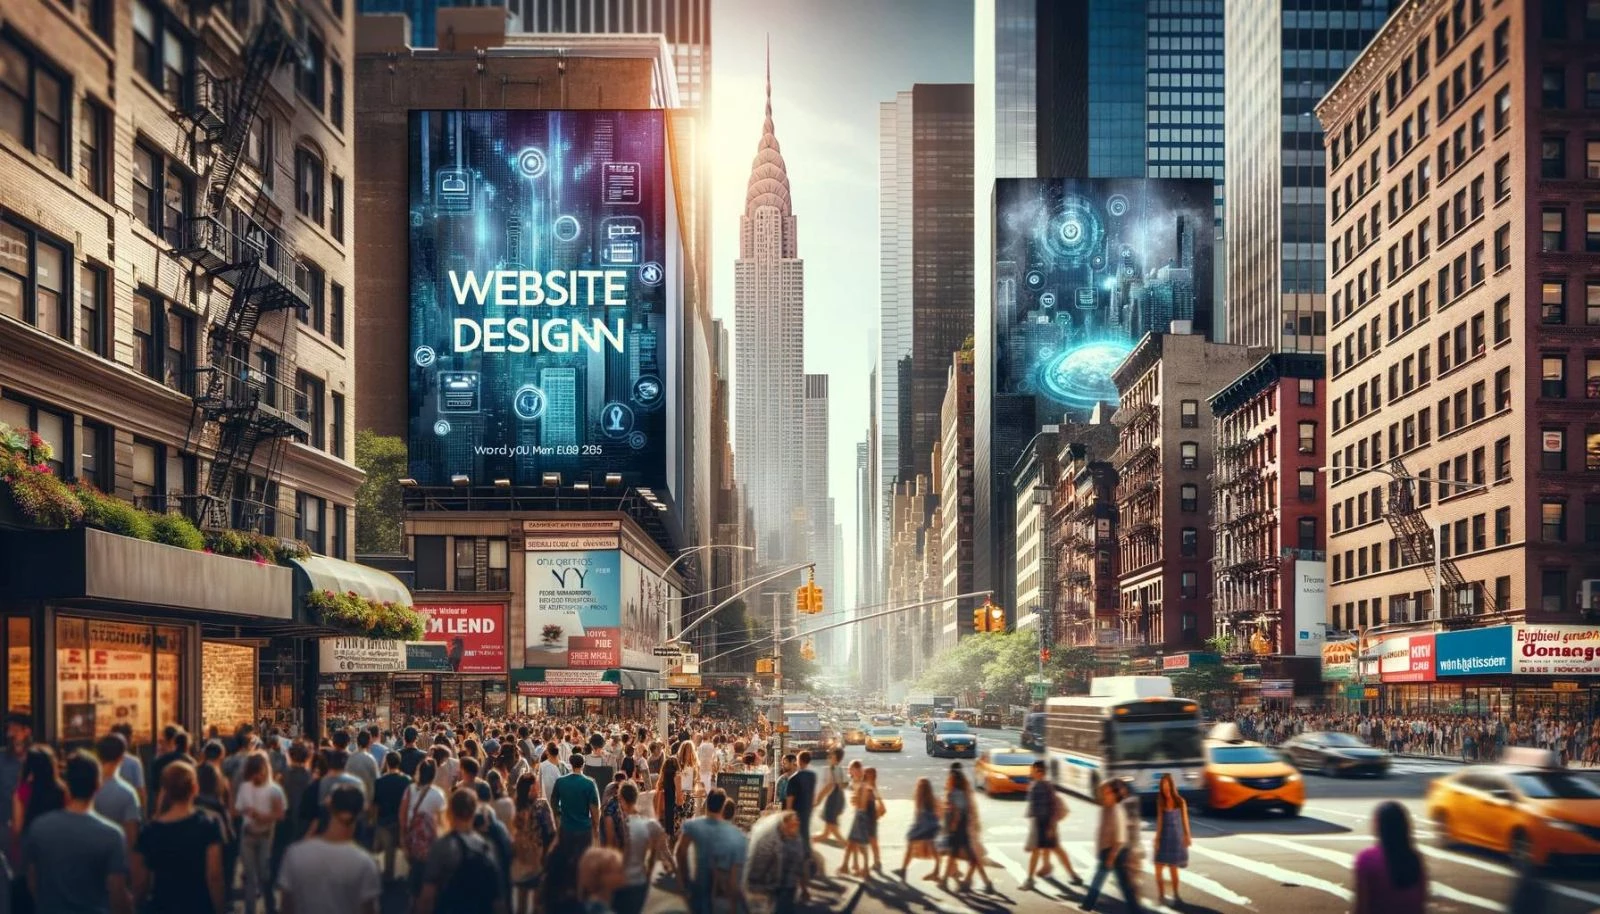 A bustling New York City street with diverse crowds, skyscrapers, and digital billboards advertising website design services